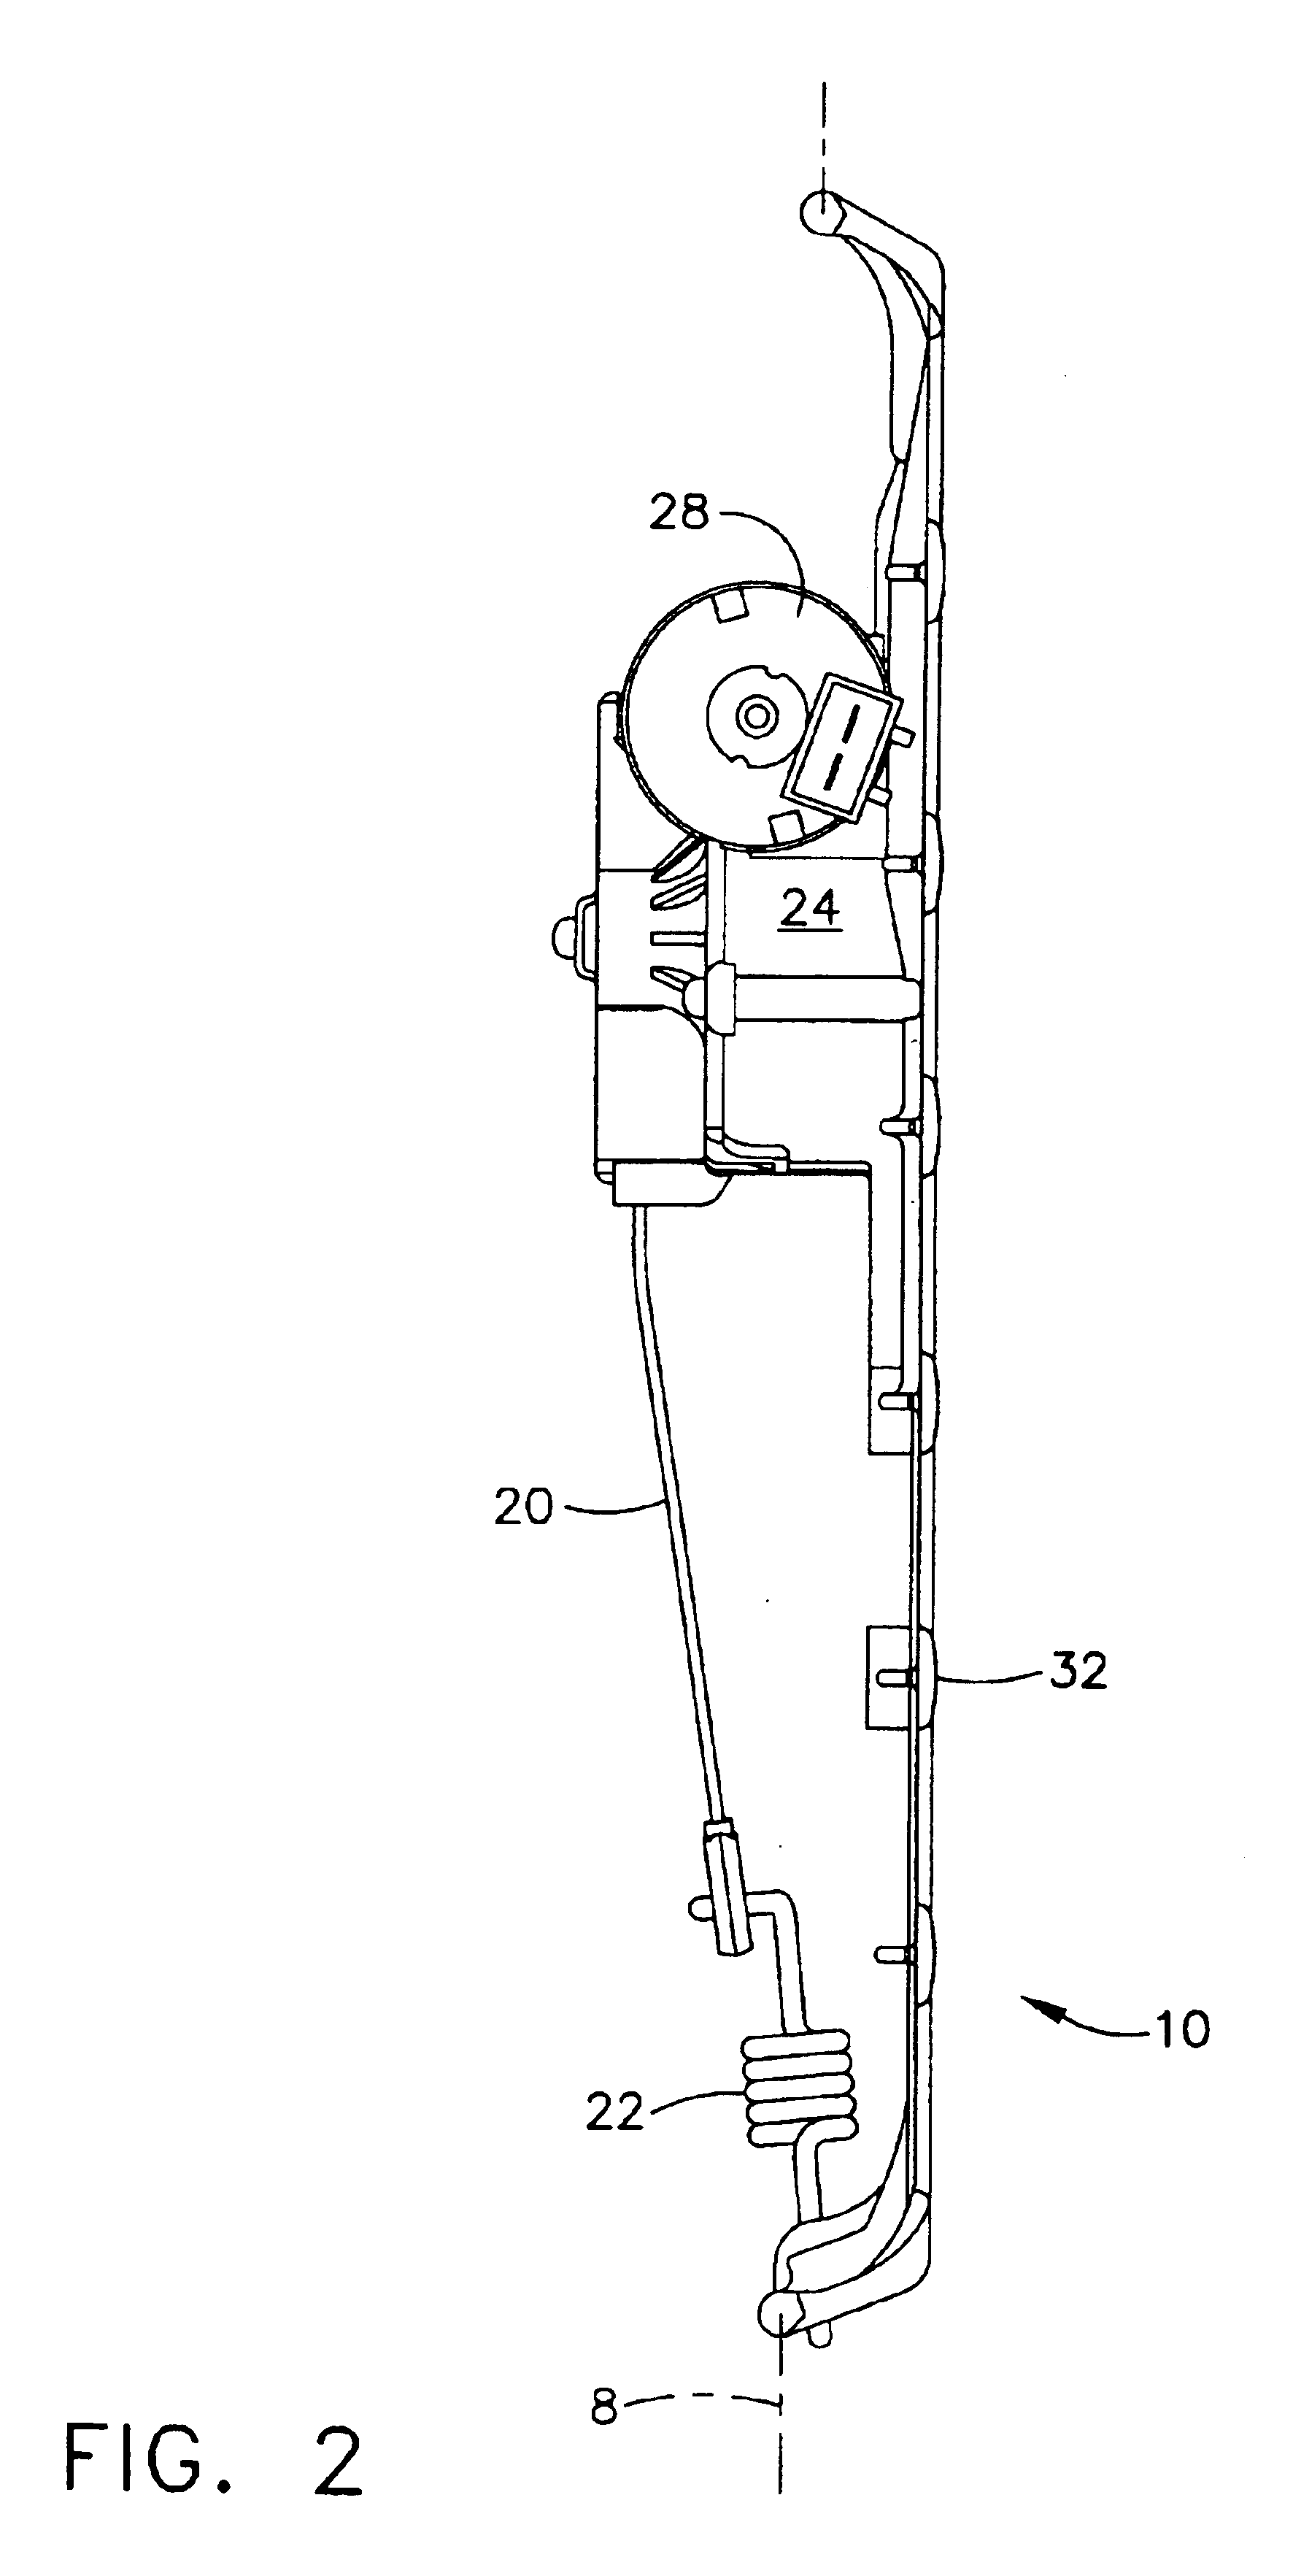 Method and apparatus for lumbar support with integrated actuator housing